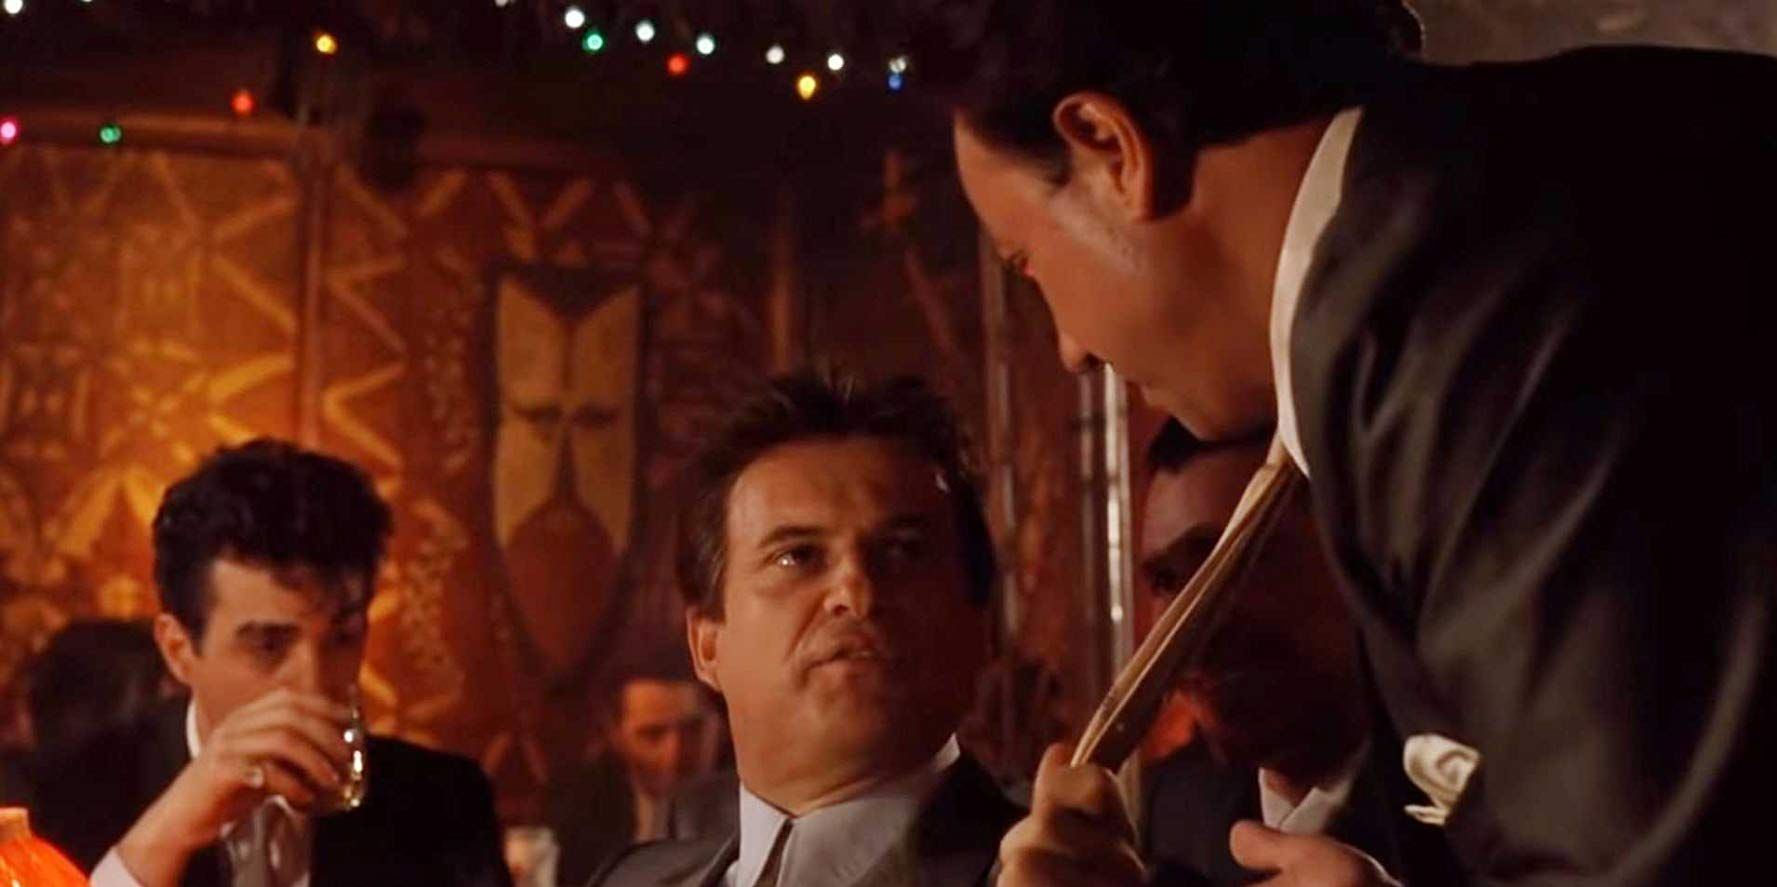 Tommy DeVito talking to someone at a bar in Goodfellas.